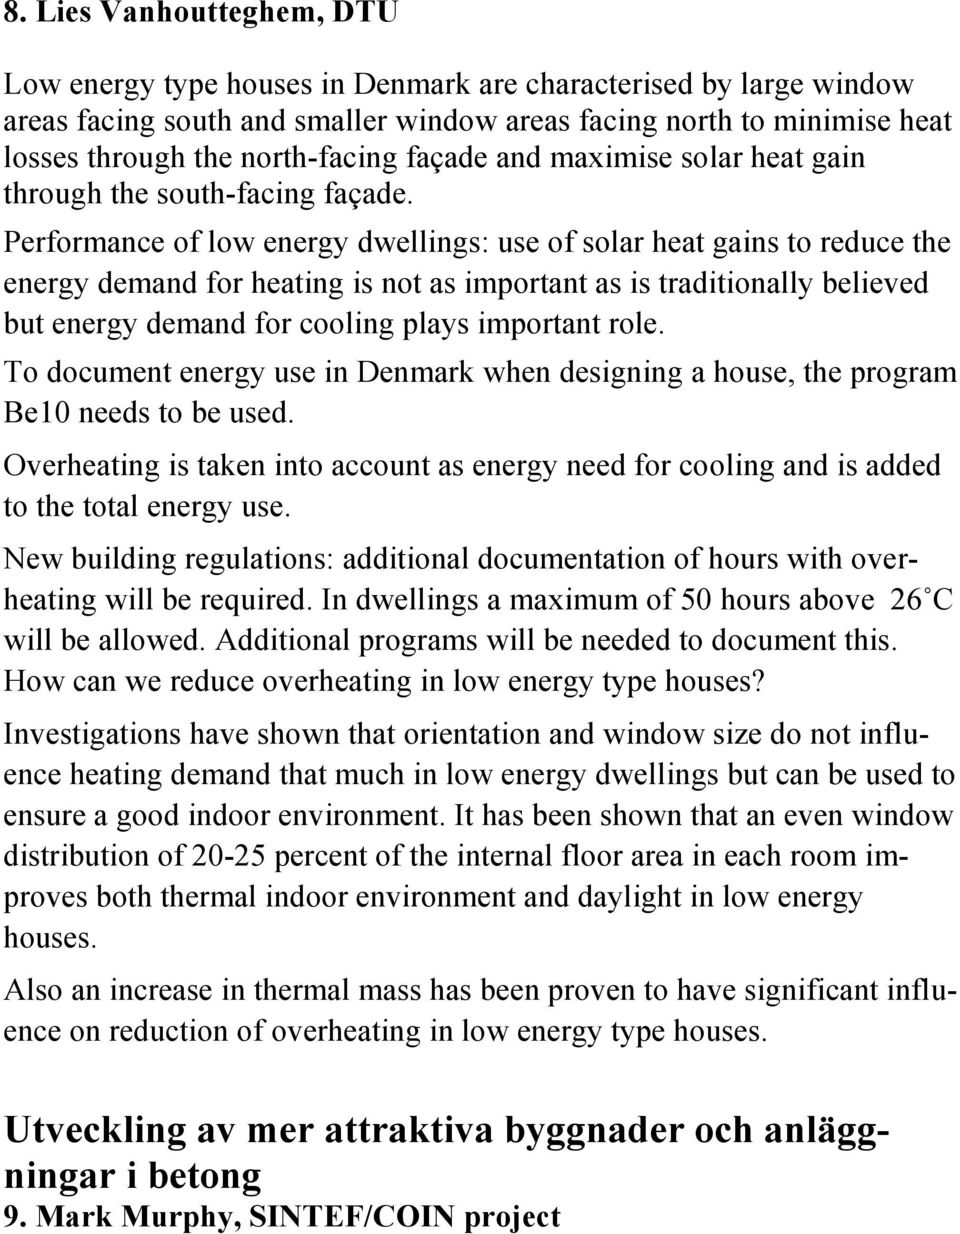 Performance of low energy dwellings: use of solar heat gains to reduce the energy demand for heating is not as important as is traditionally believed but energy demand for cooling plays important